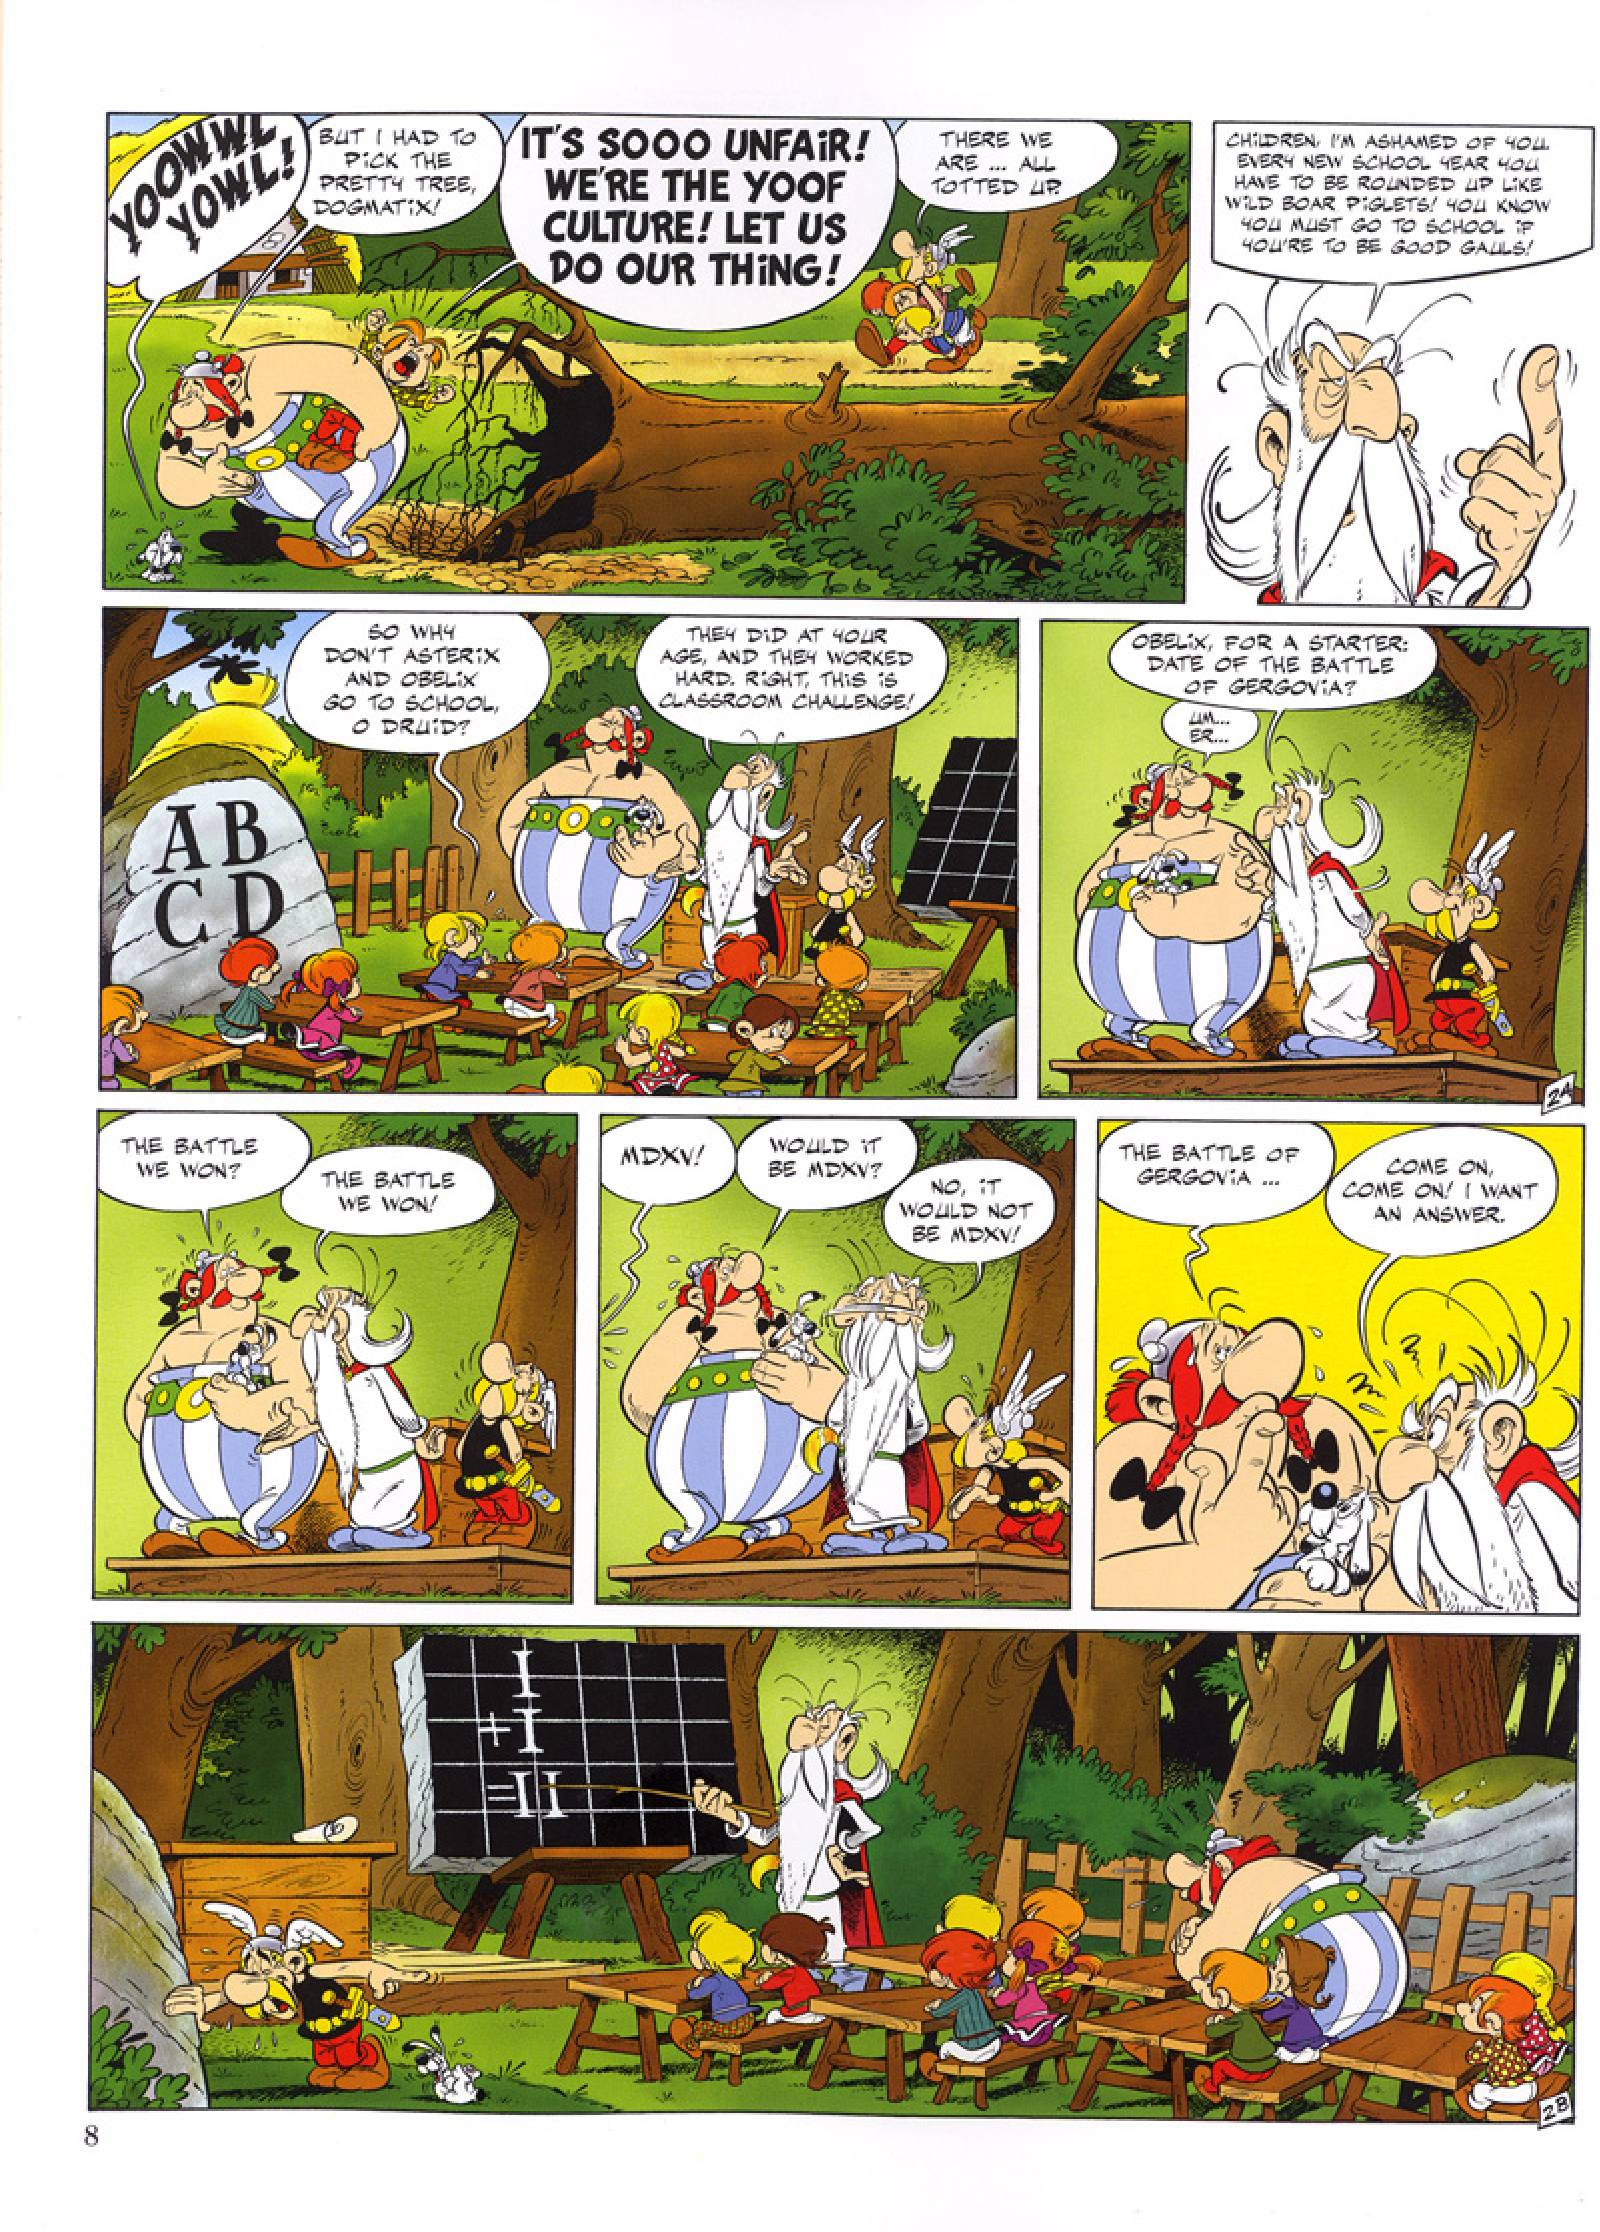 Asterix and the Class Act review